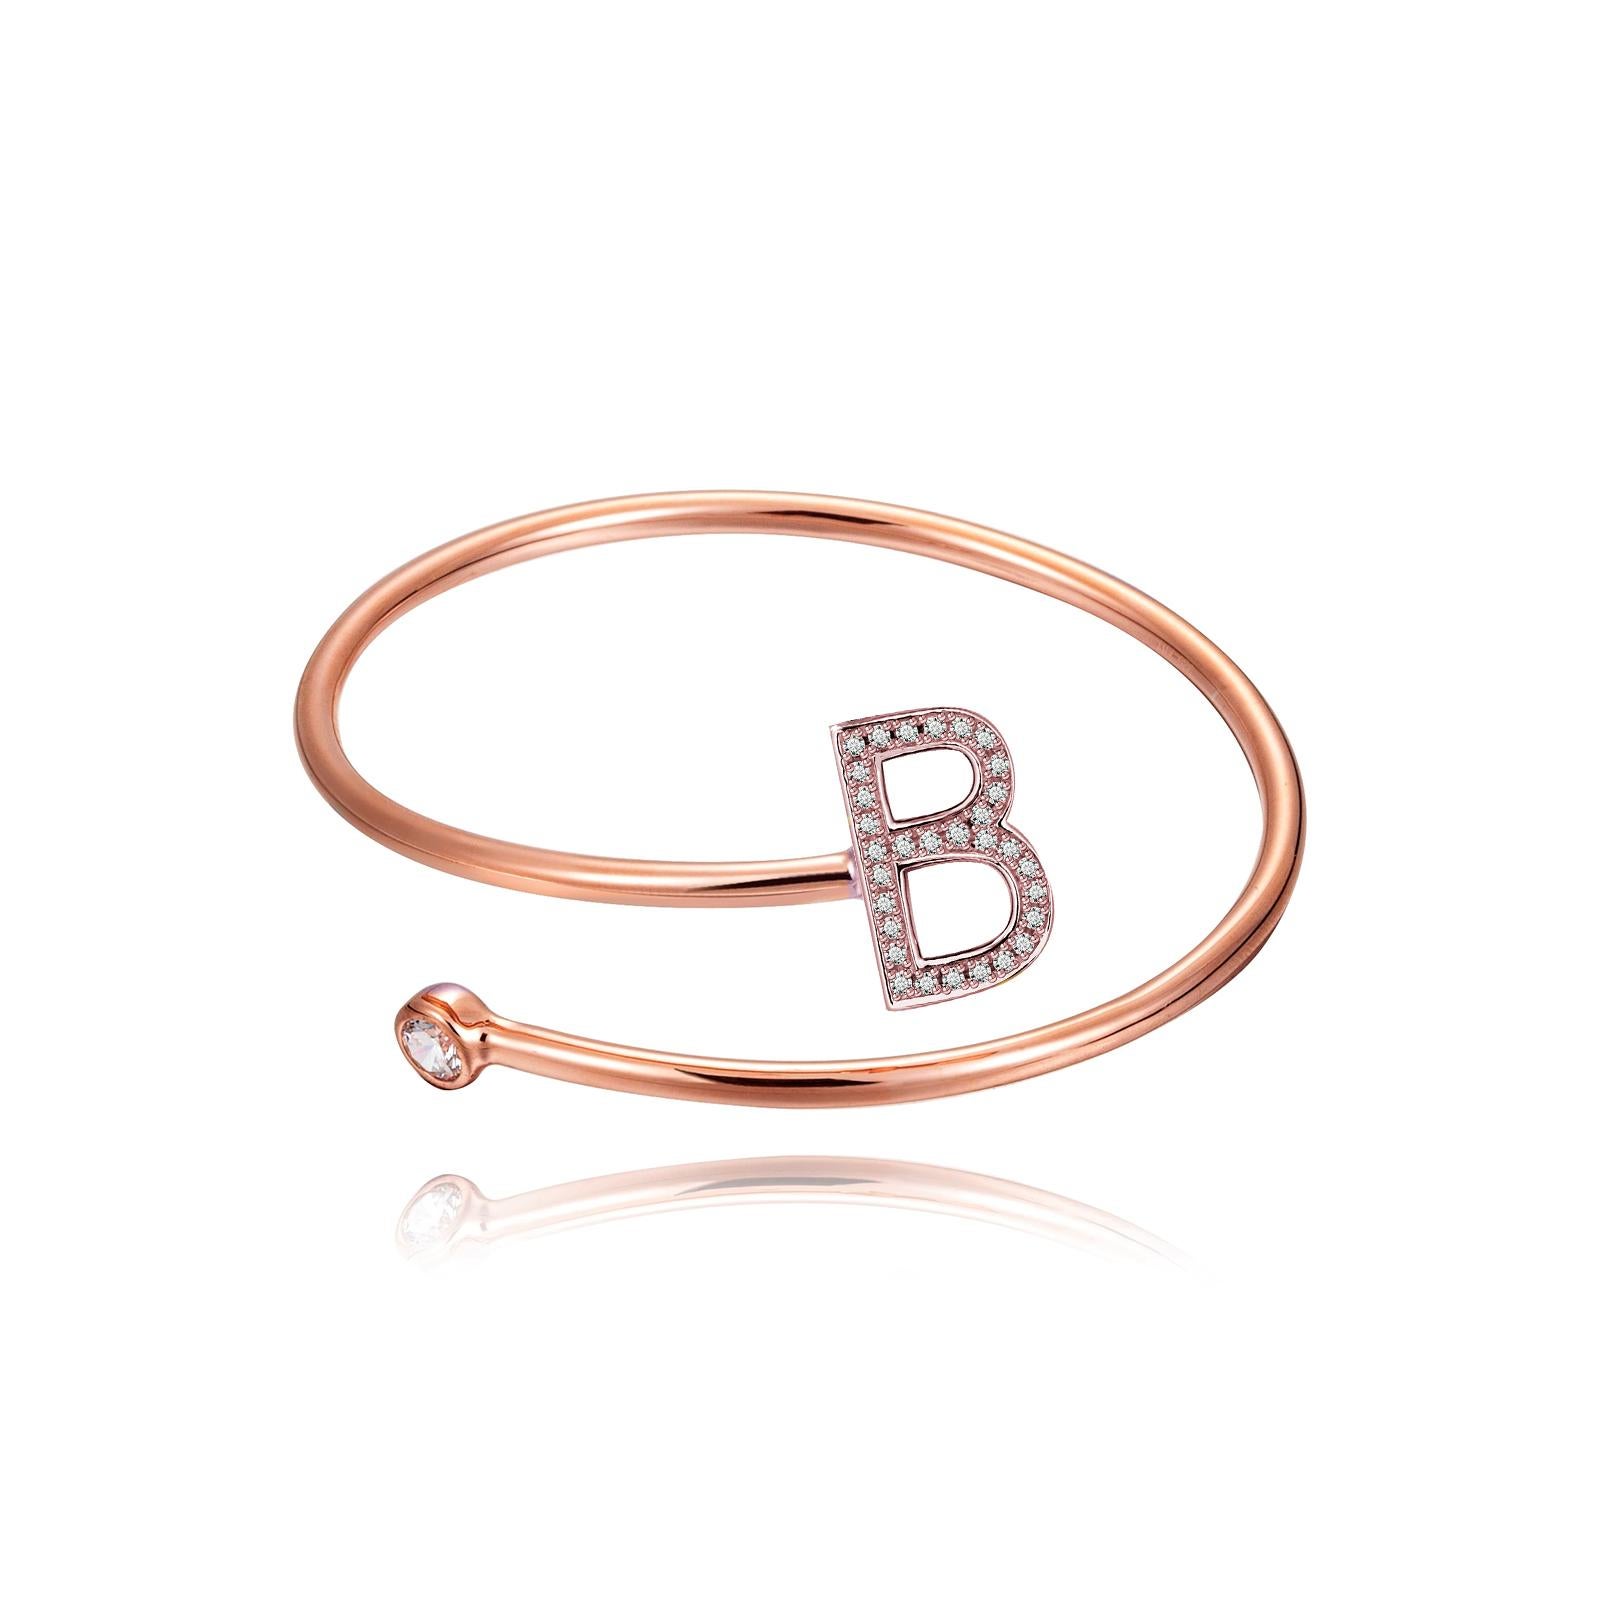 Nothing says YOU more than YOU. You are unique. You are bold.  You're not afraid to share who you are.  This initial wire bezel cuff is elegantly slimline while sharing a little bit about yourself with others. .925 sterling silver base also